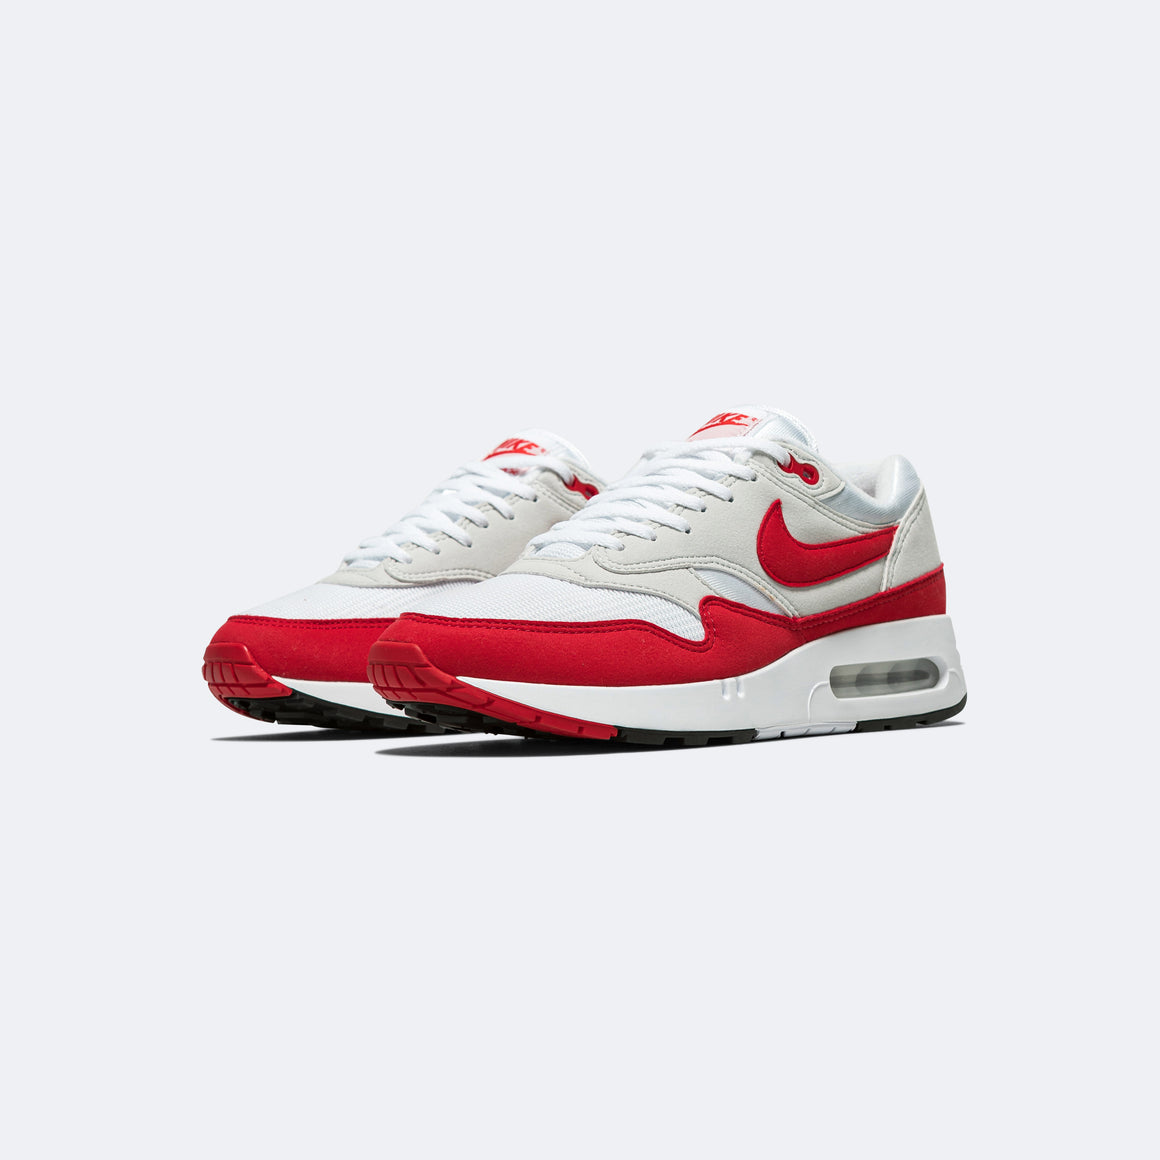 Nike - Womens Air Max 1 '86 OG "Big Bubble" - White/University Red-Lt Neutral Grey - UP THERE